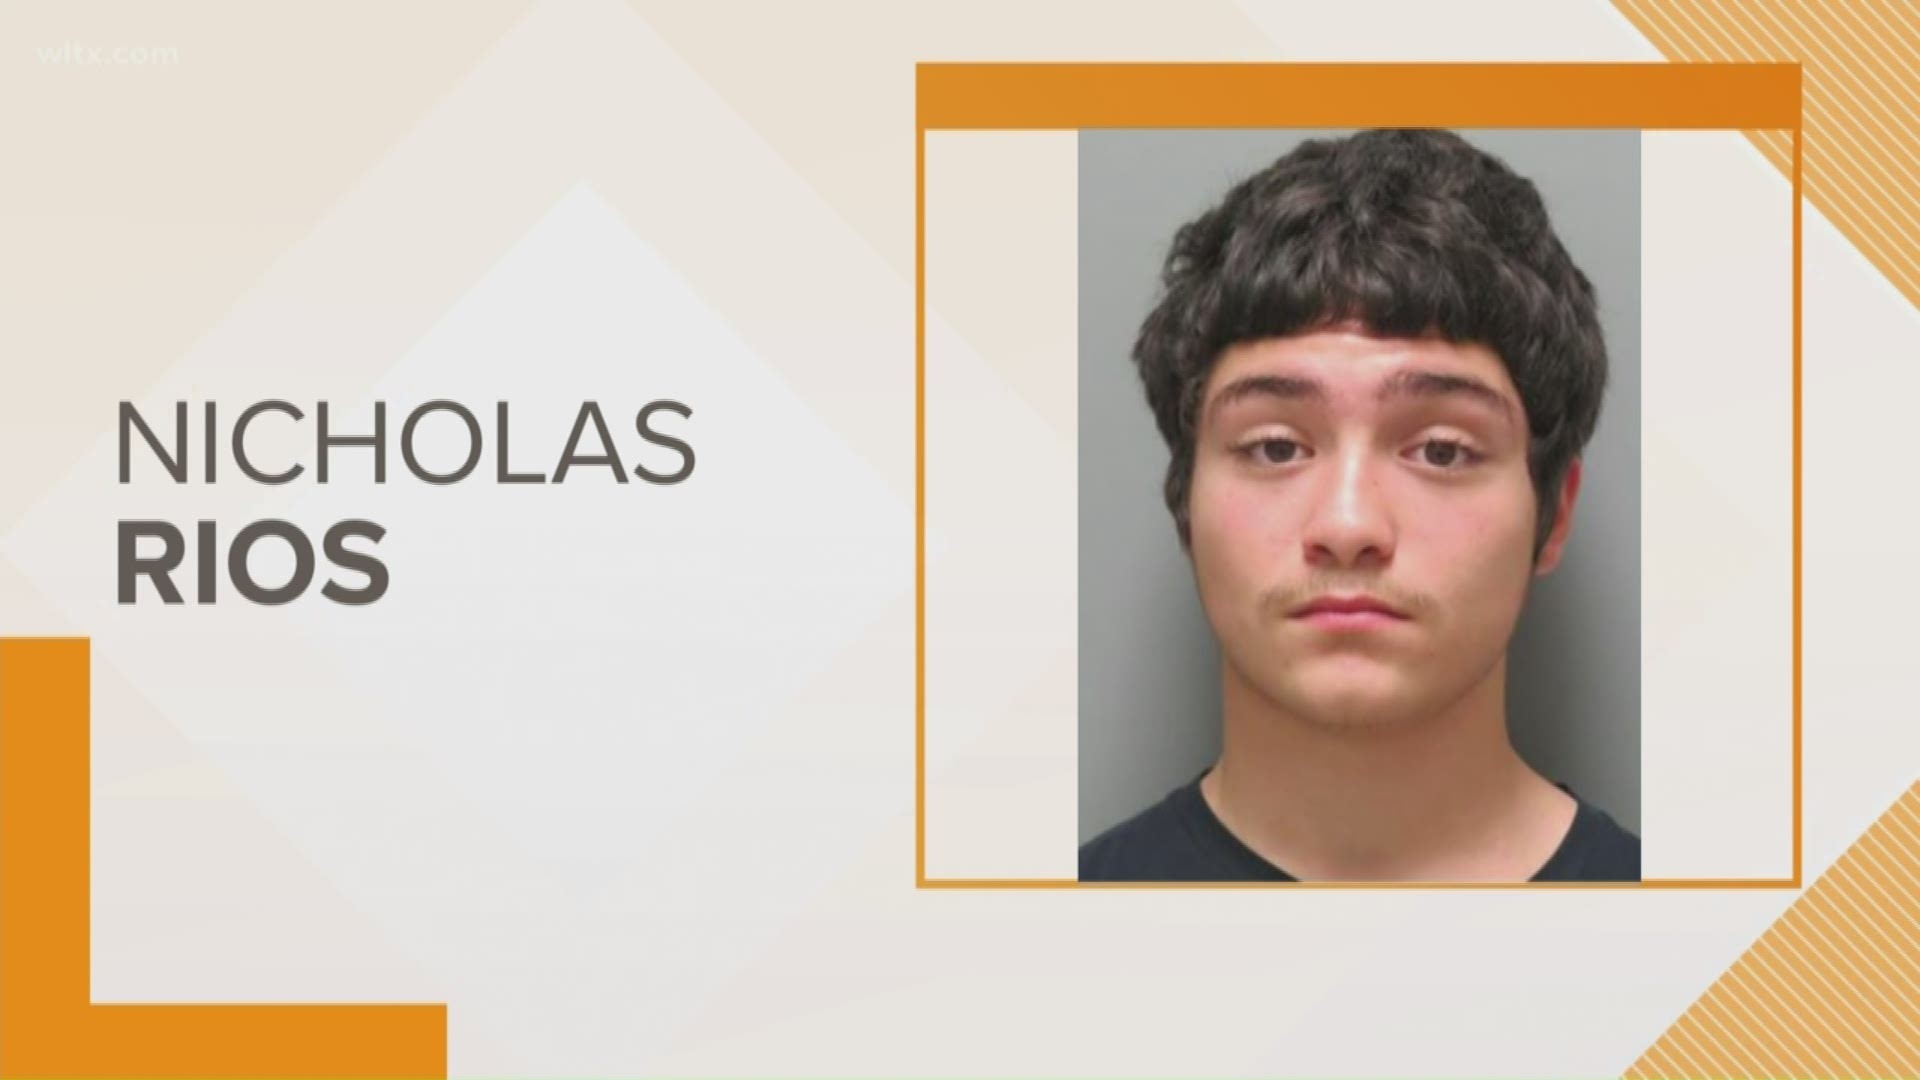 Officials say 16-year-old Nicholas Rios is believed to have left the DJJ Broad River Road Complex in Columbia.